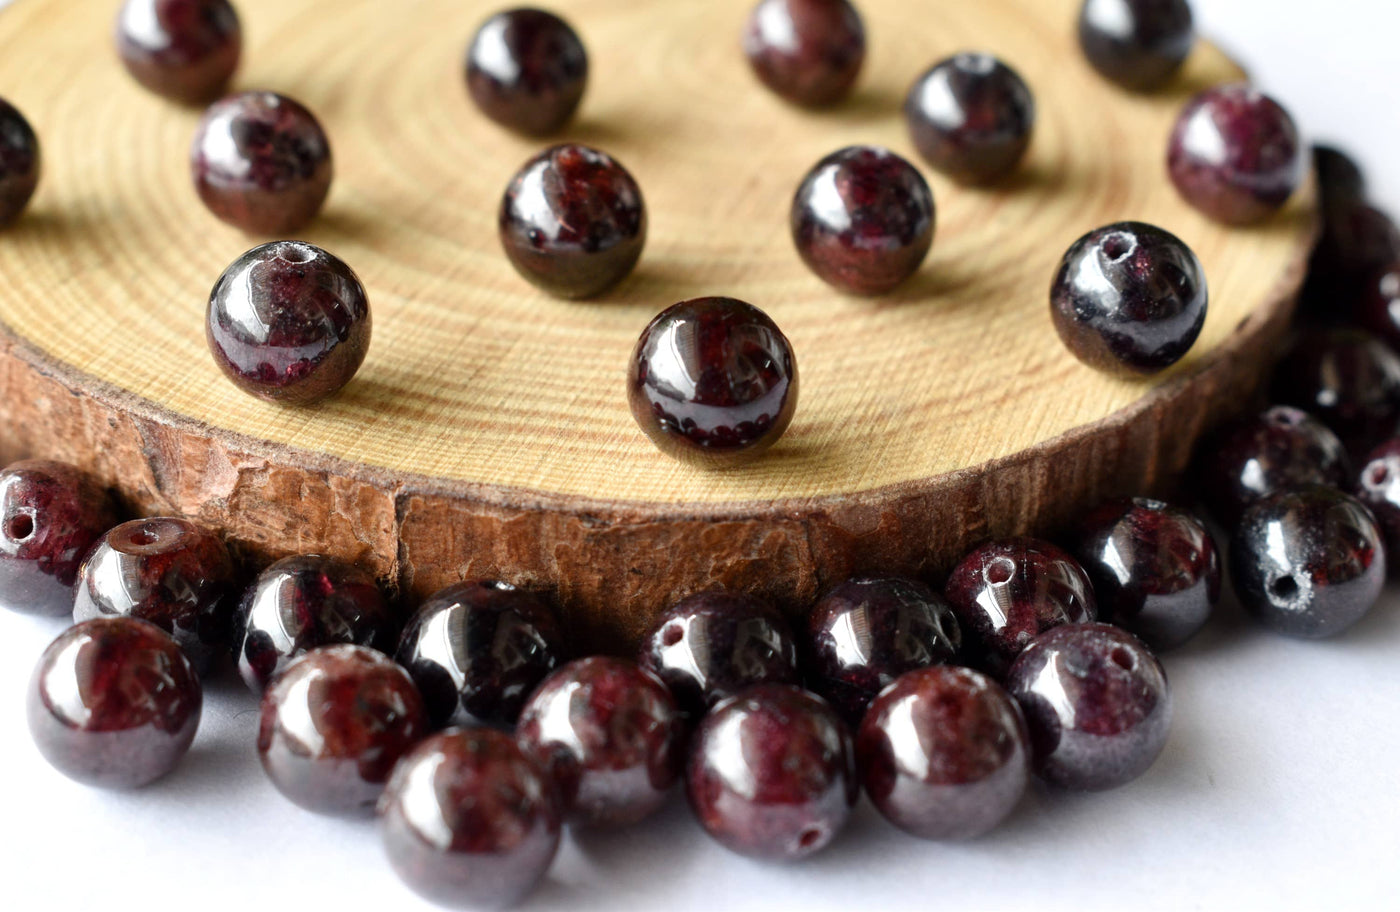 Garnet Beads, Natural Round Crystal Beads 4mm to 12mm